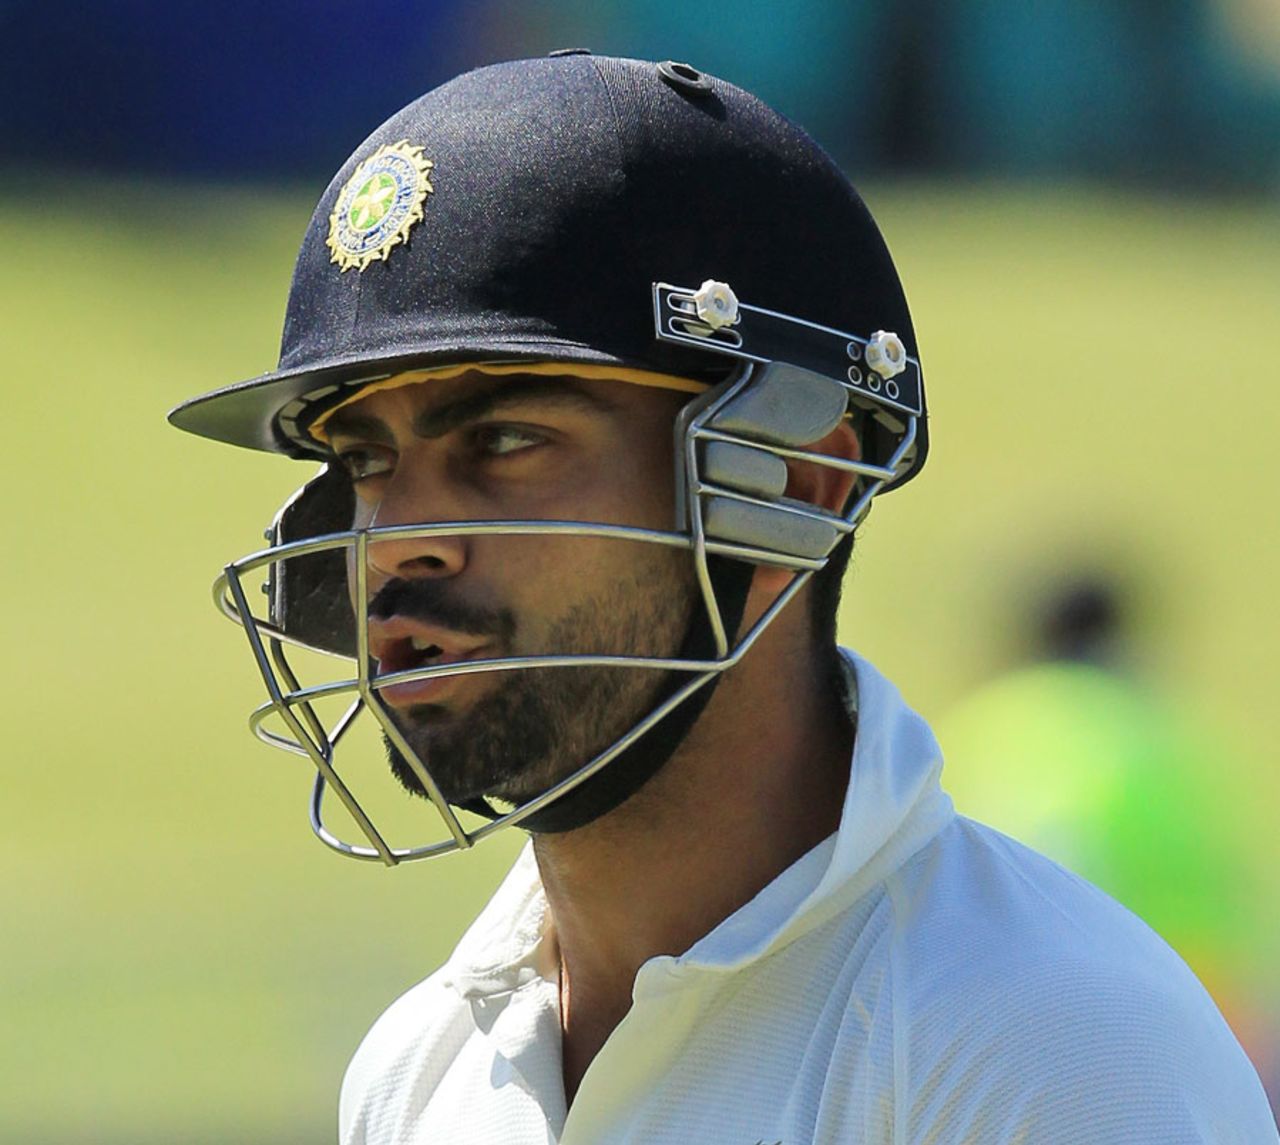 Virat Kohli is visibly displeased after being given out by the umpire, South Africa v India, 2nd Test, Durban, 4th day, December 29, 2013